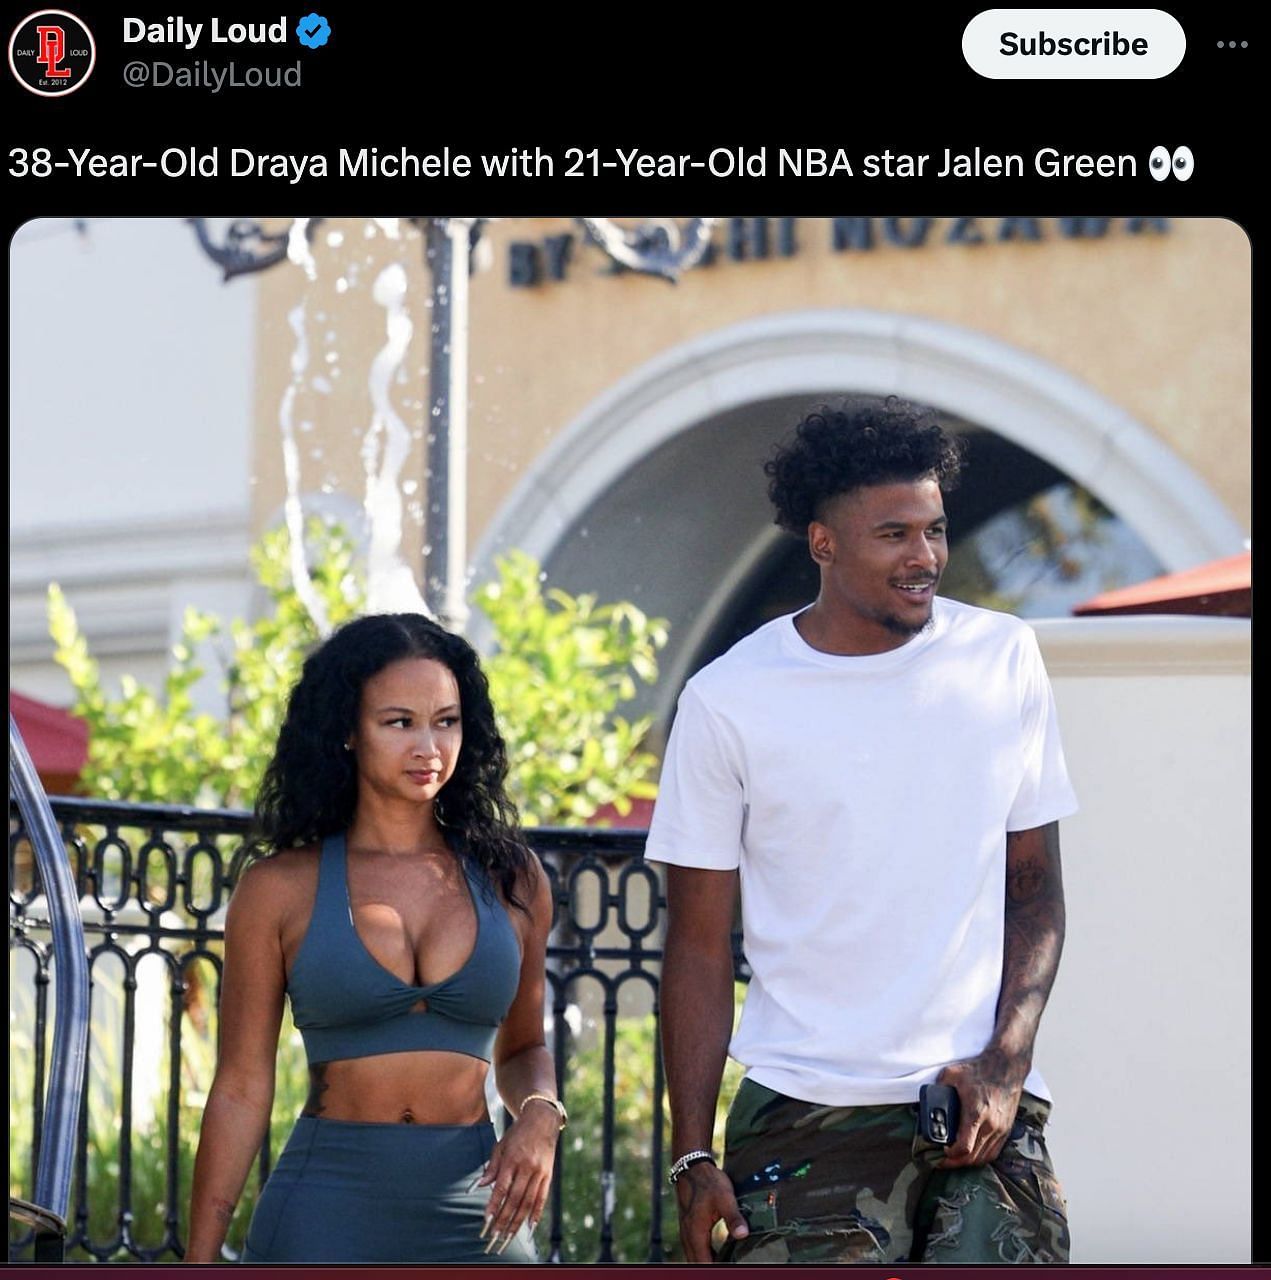 Who is Draya Michele? Houston Rockets Jalen Green spotted with 38-year-old fitness model